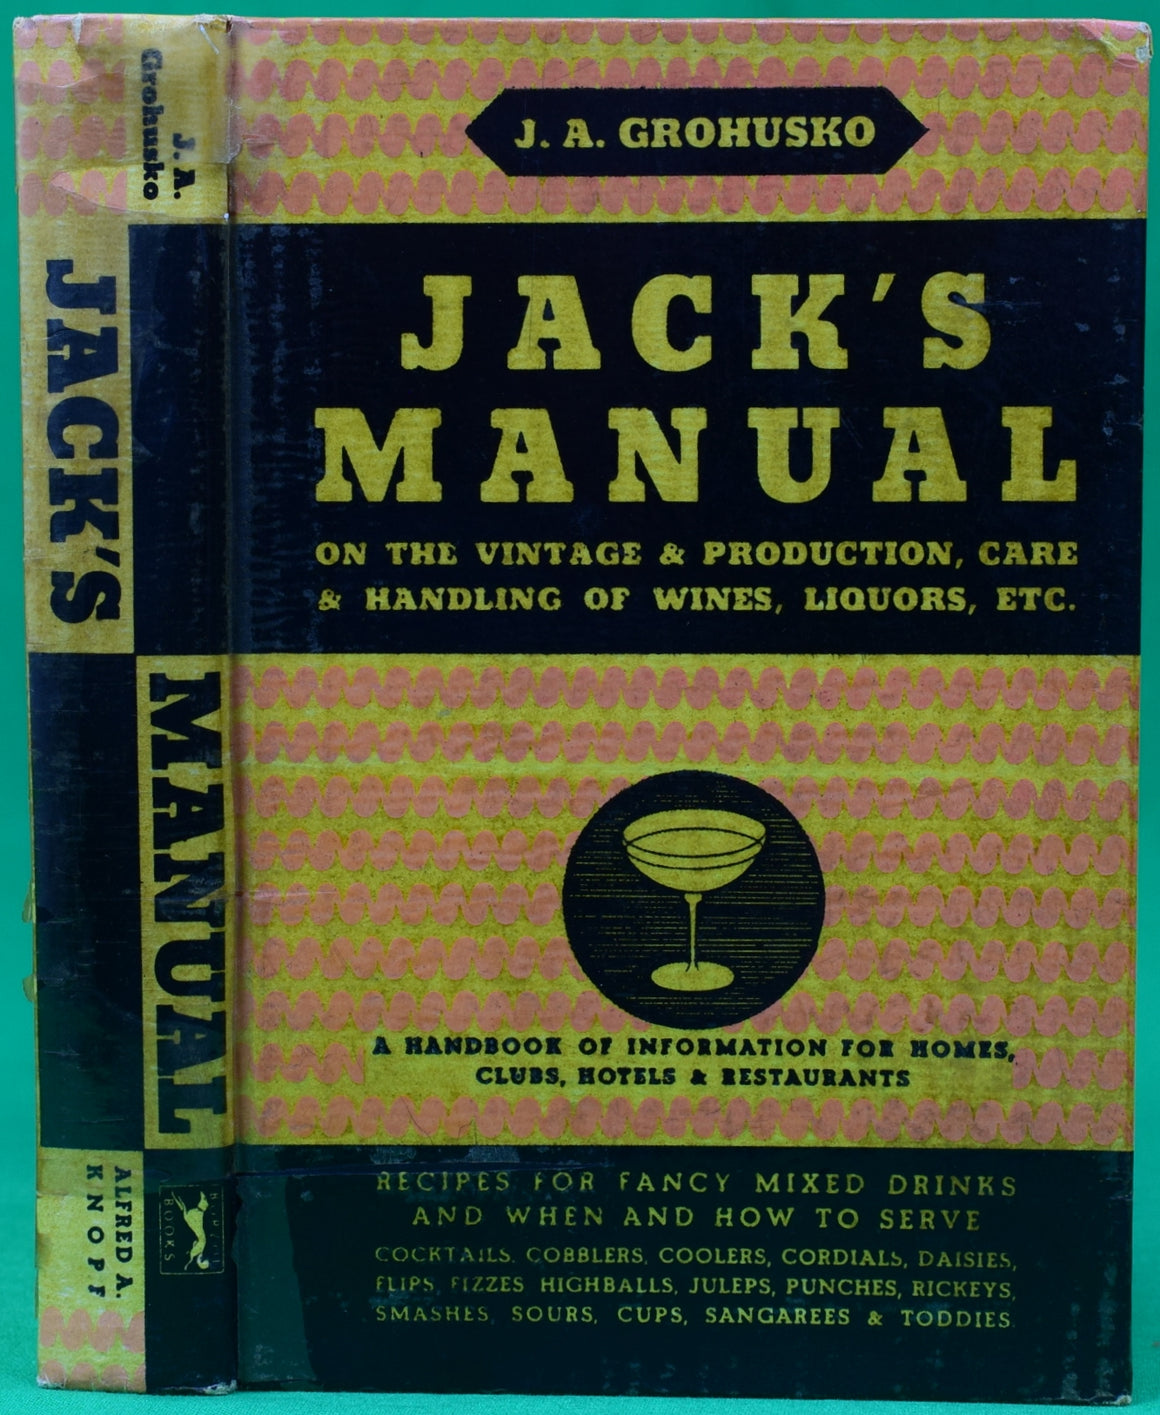 "Jack's Manual On The Vintage & Production, Care & Handling Of Wines, Liquors, Etc." 1933 GROHUSKO, J. A.